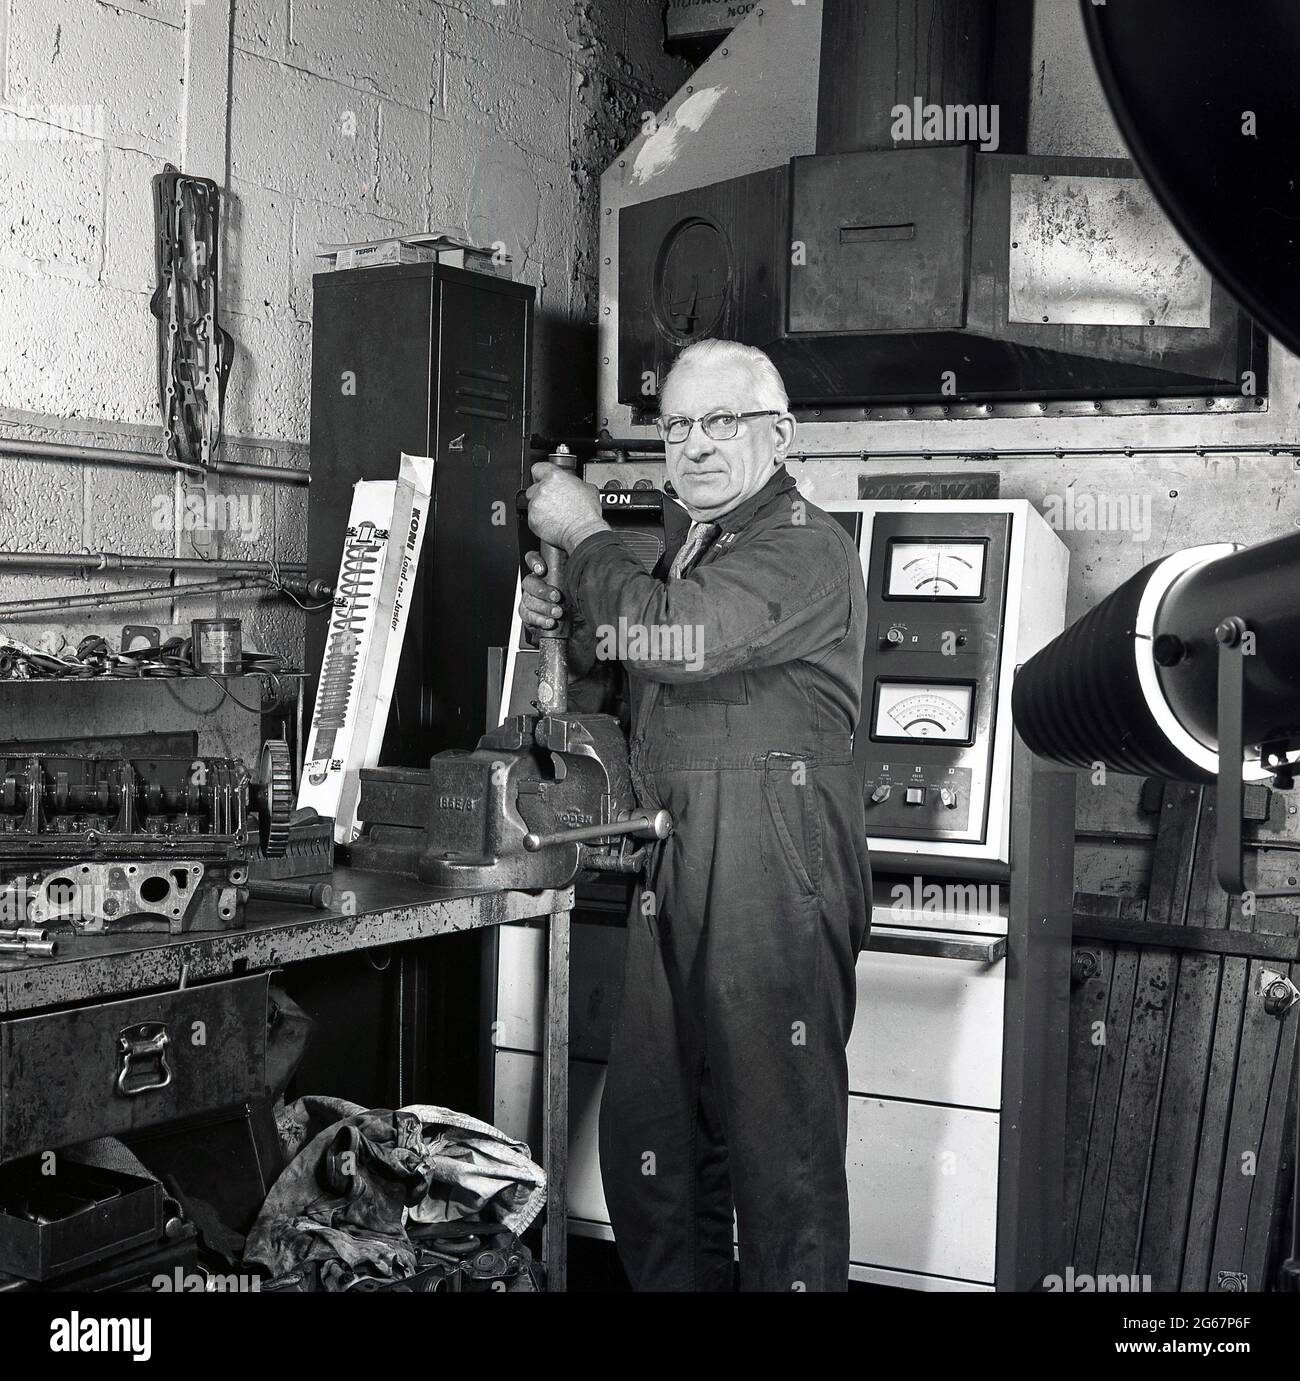 1970s, historical, inside a car repair workshop, at a workbench using a vice, an elderly garage mechanic in overalls working on a shock absorber or damper for a car's suspension, England, UK. Stock Photo